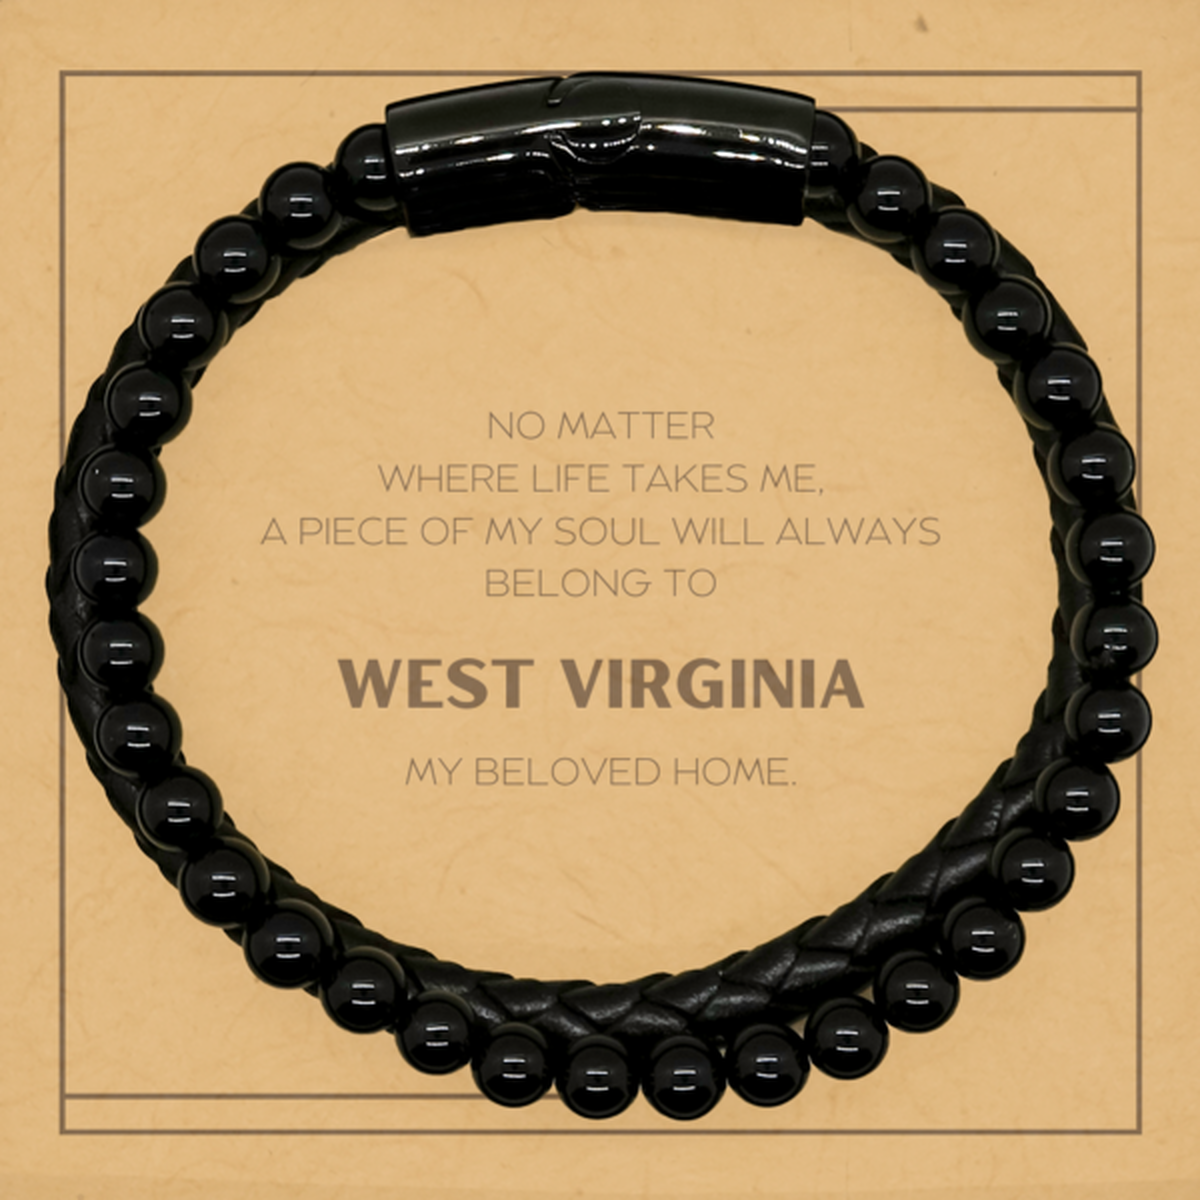 Love West Virginia State Gifts, My soul will always belong to West Virginia, Proud Stone Leather Bracelets, Birthday Unique Gifts For West Virginia Men, Women, Friends